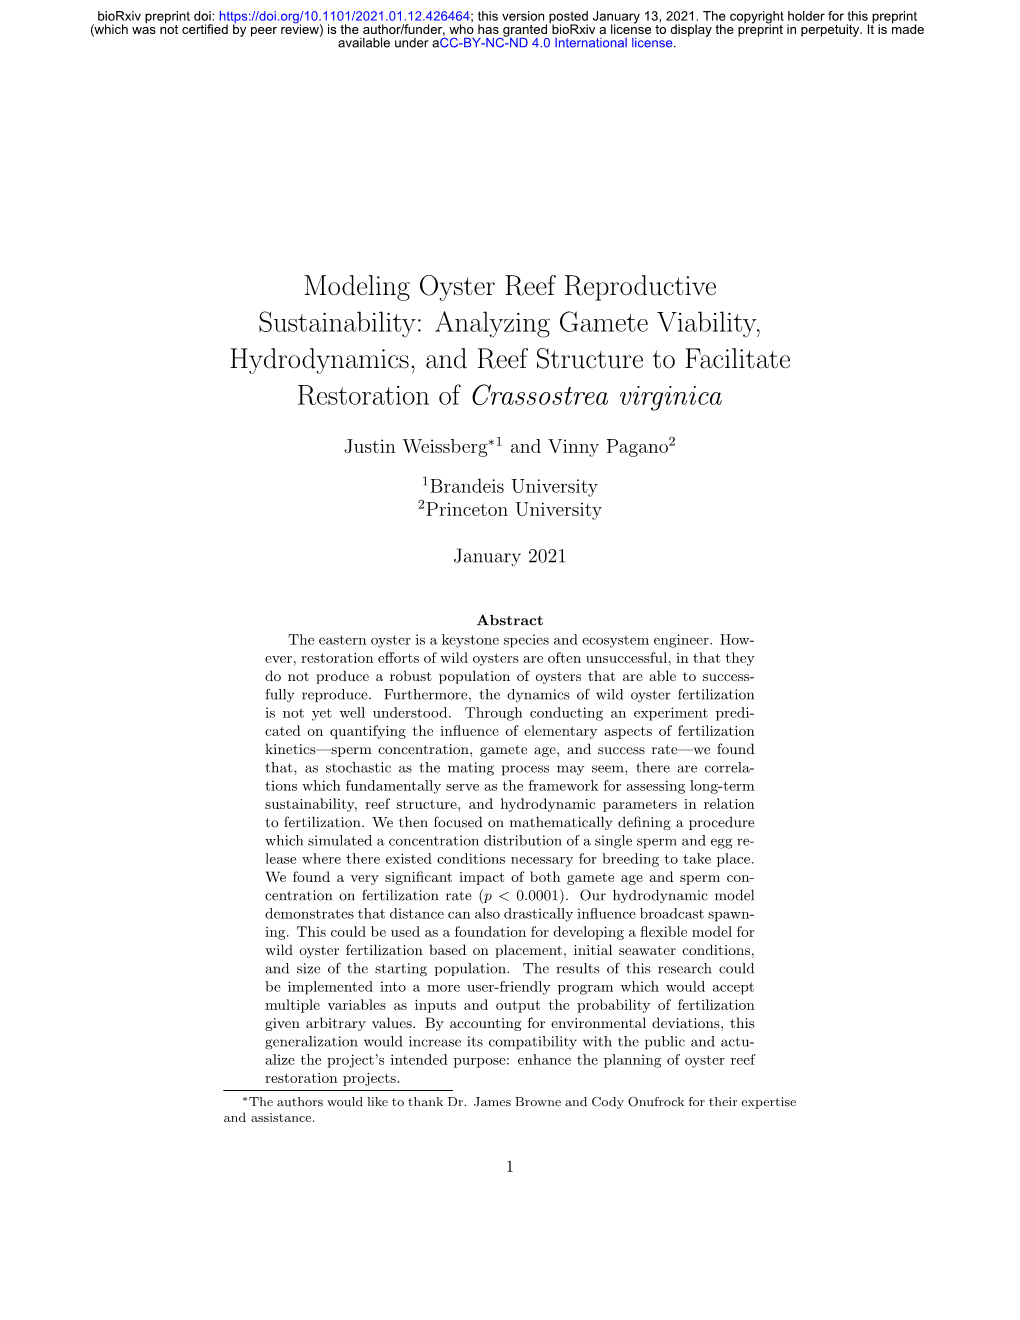 Modeling Oyster Reef Reproductive Sustainability: Analyzing Gamete Viability, Hydrodynamics, and Reef Structure to Facilitate Restoration of Crassostrea Virginica